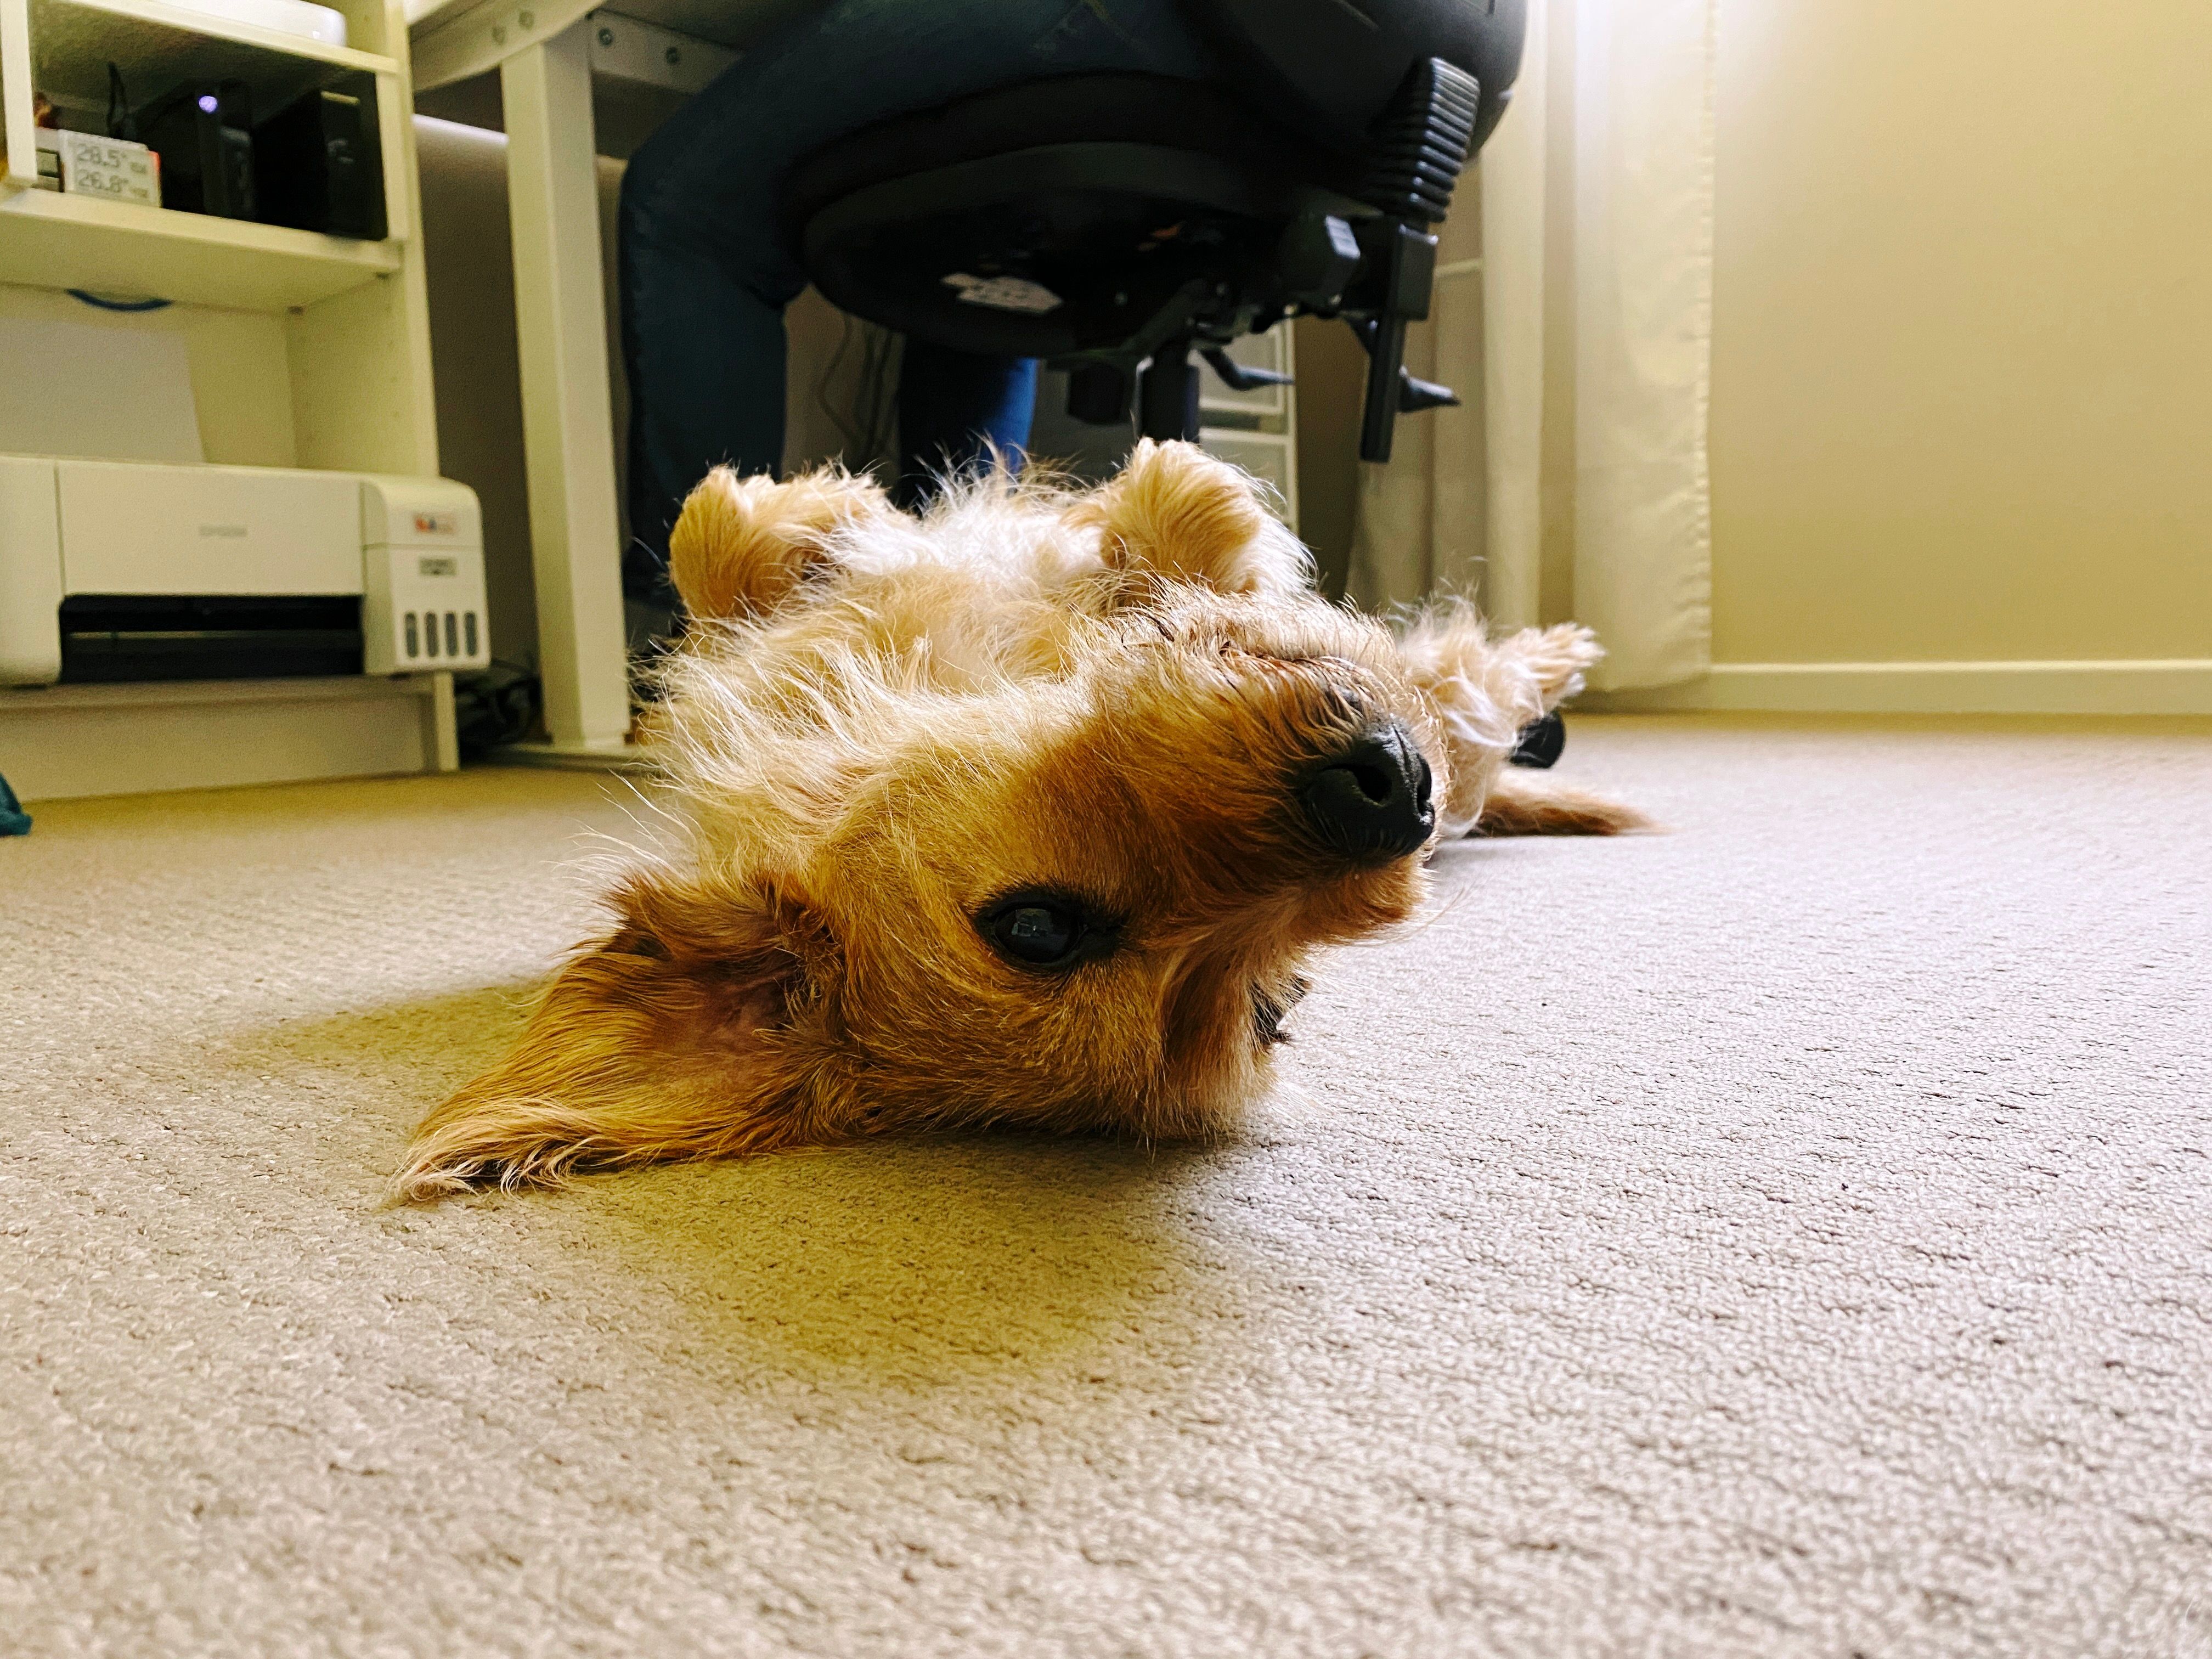 A photo taken at ground level of a small scruffy blonde dog who's lying completely upside-down with his legs in the air.